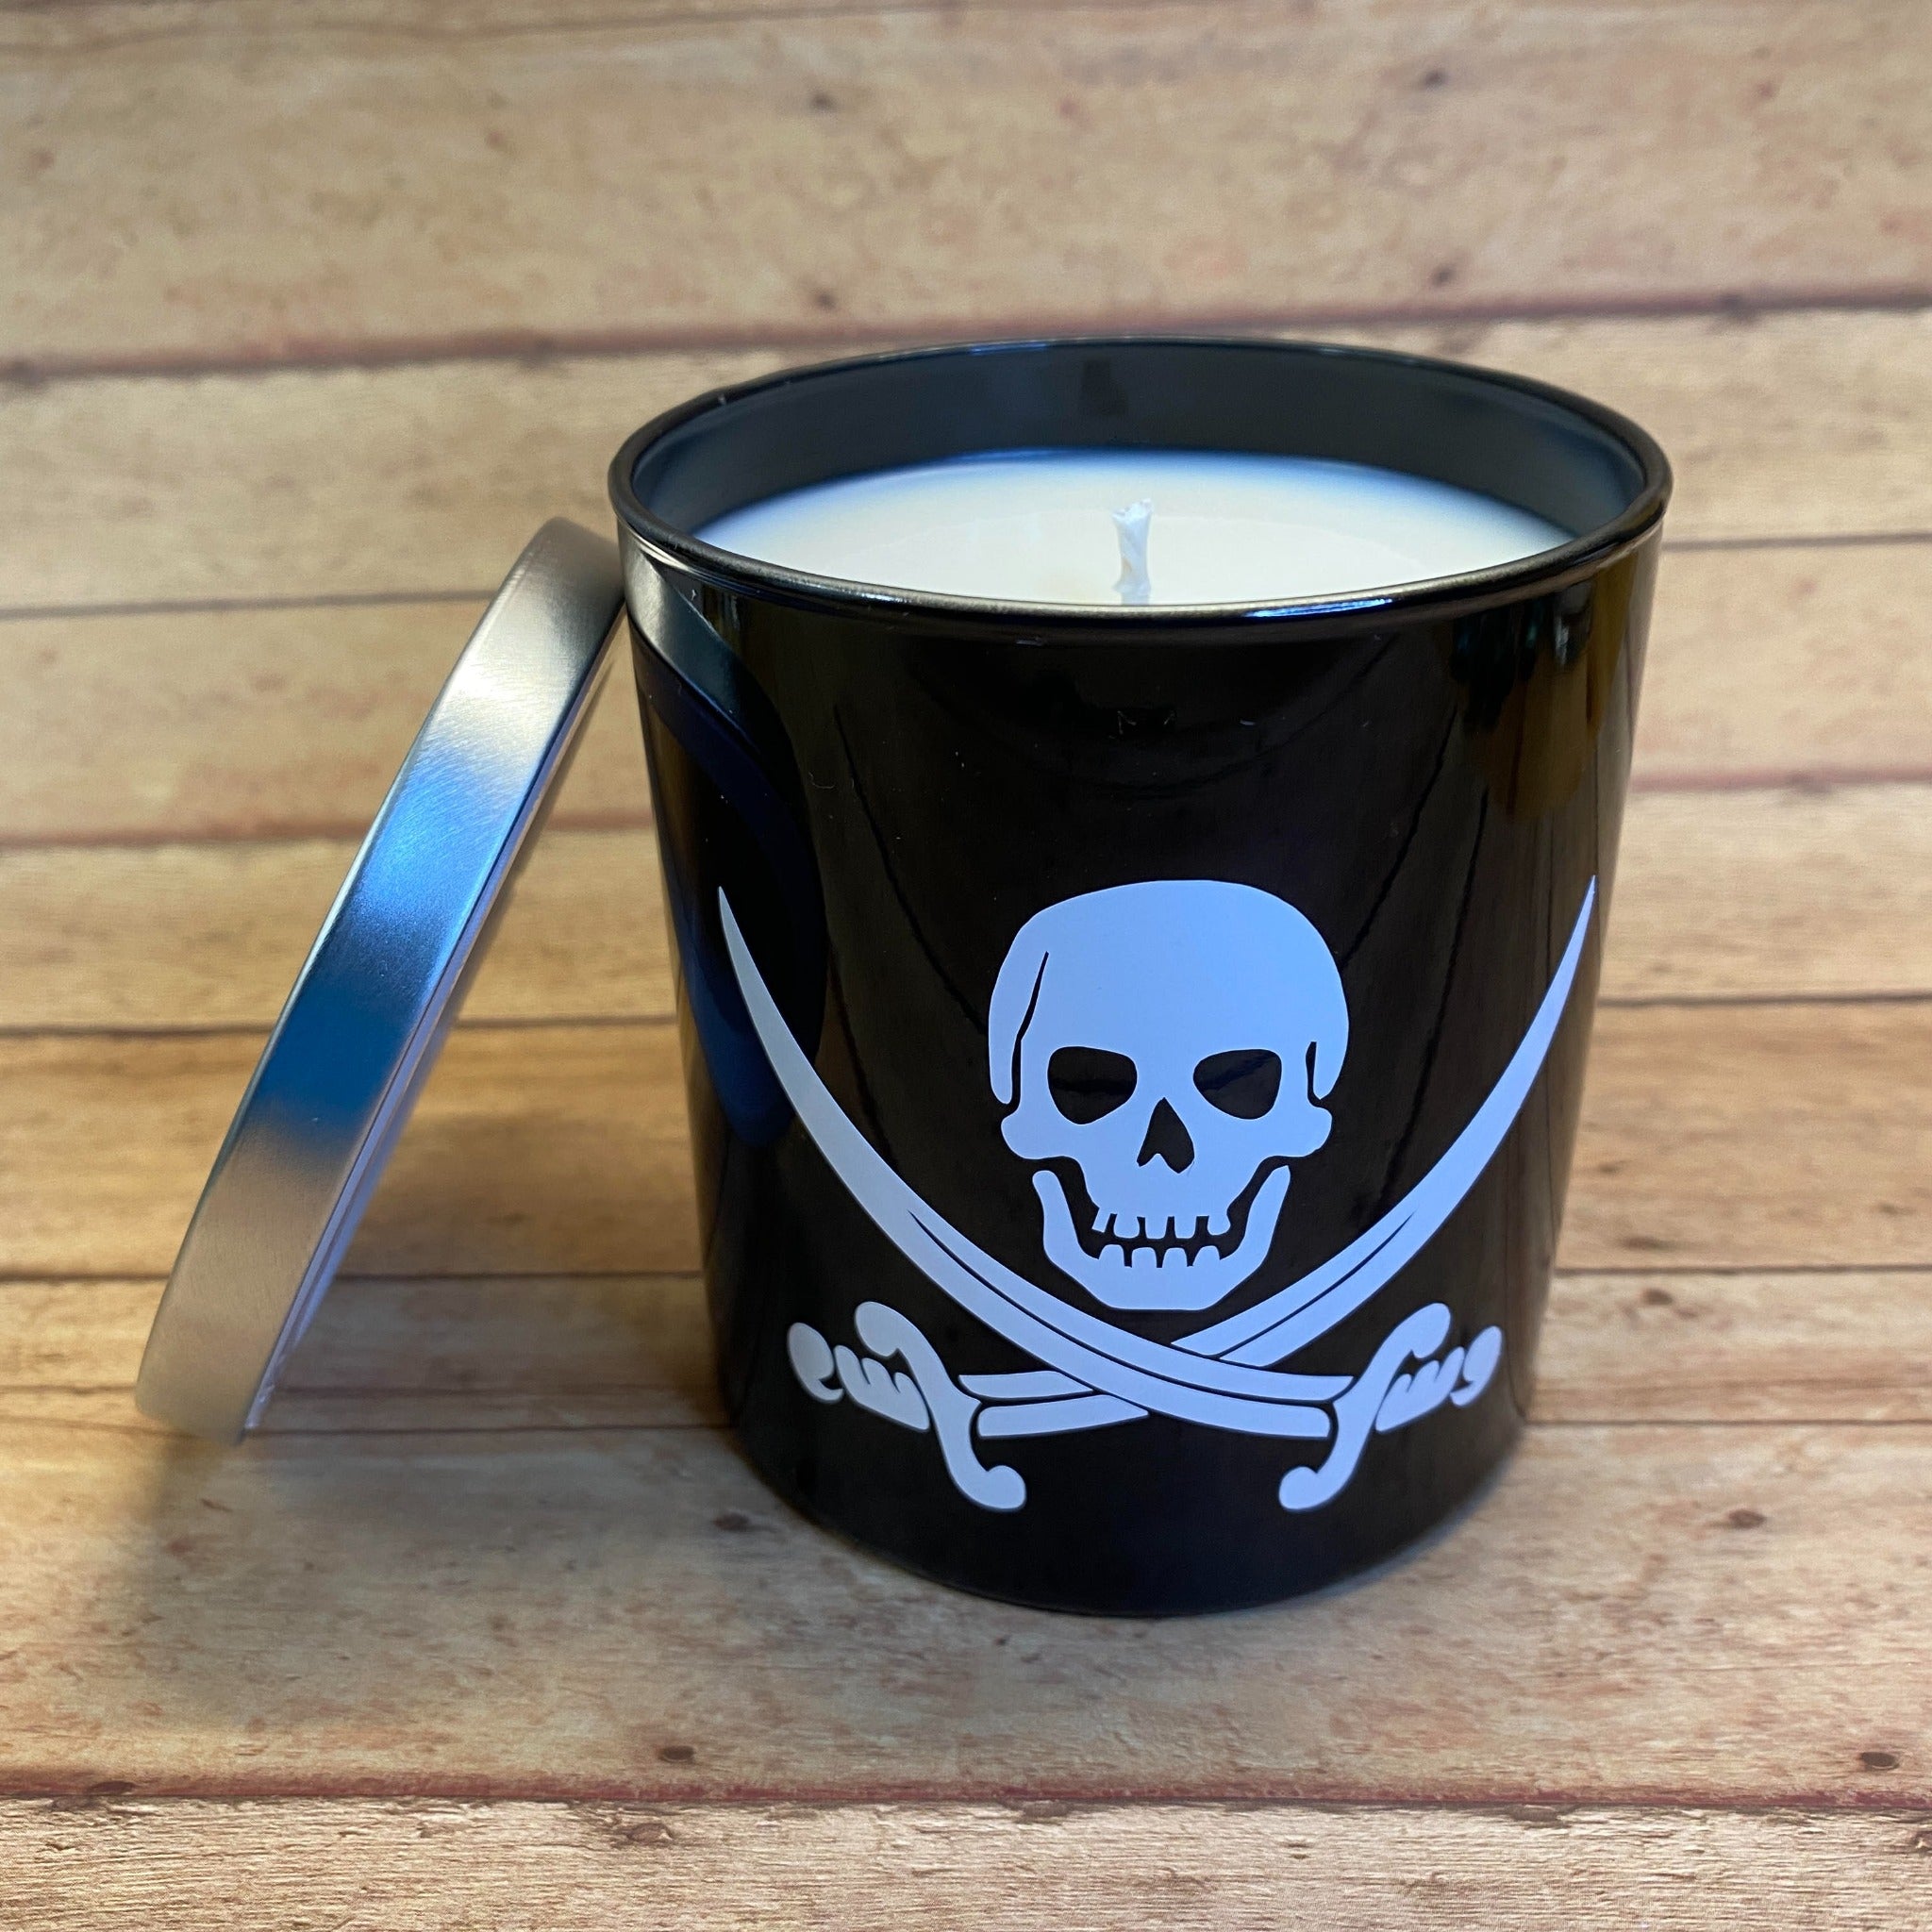 a black glass tumbler candle with the white jolly roger skull and crossed swords on it